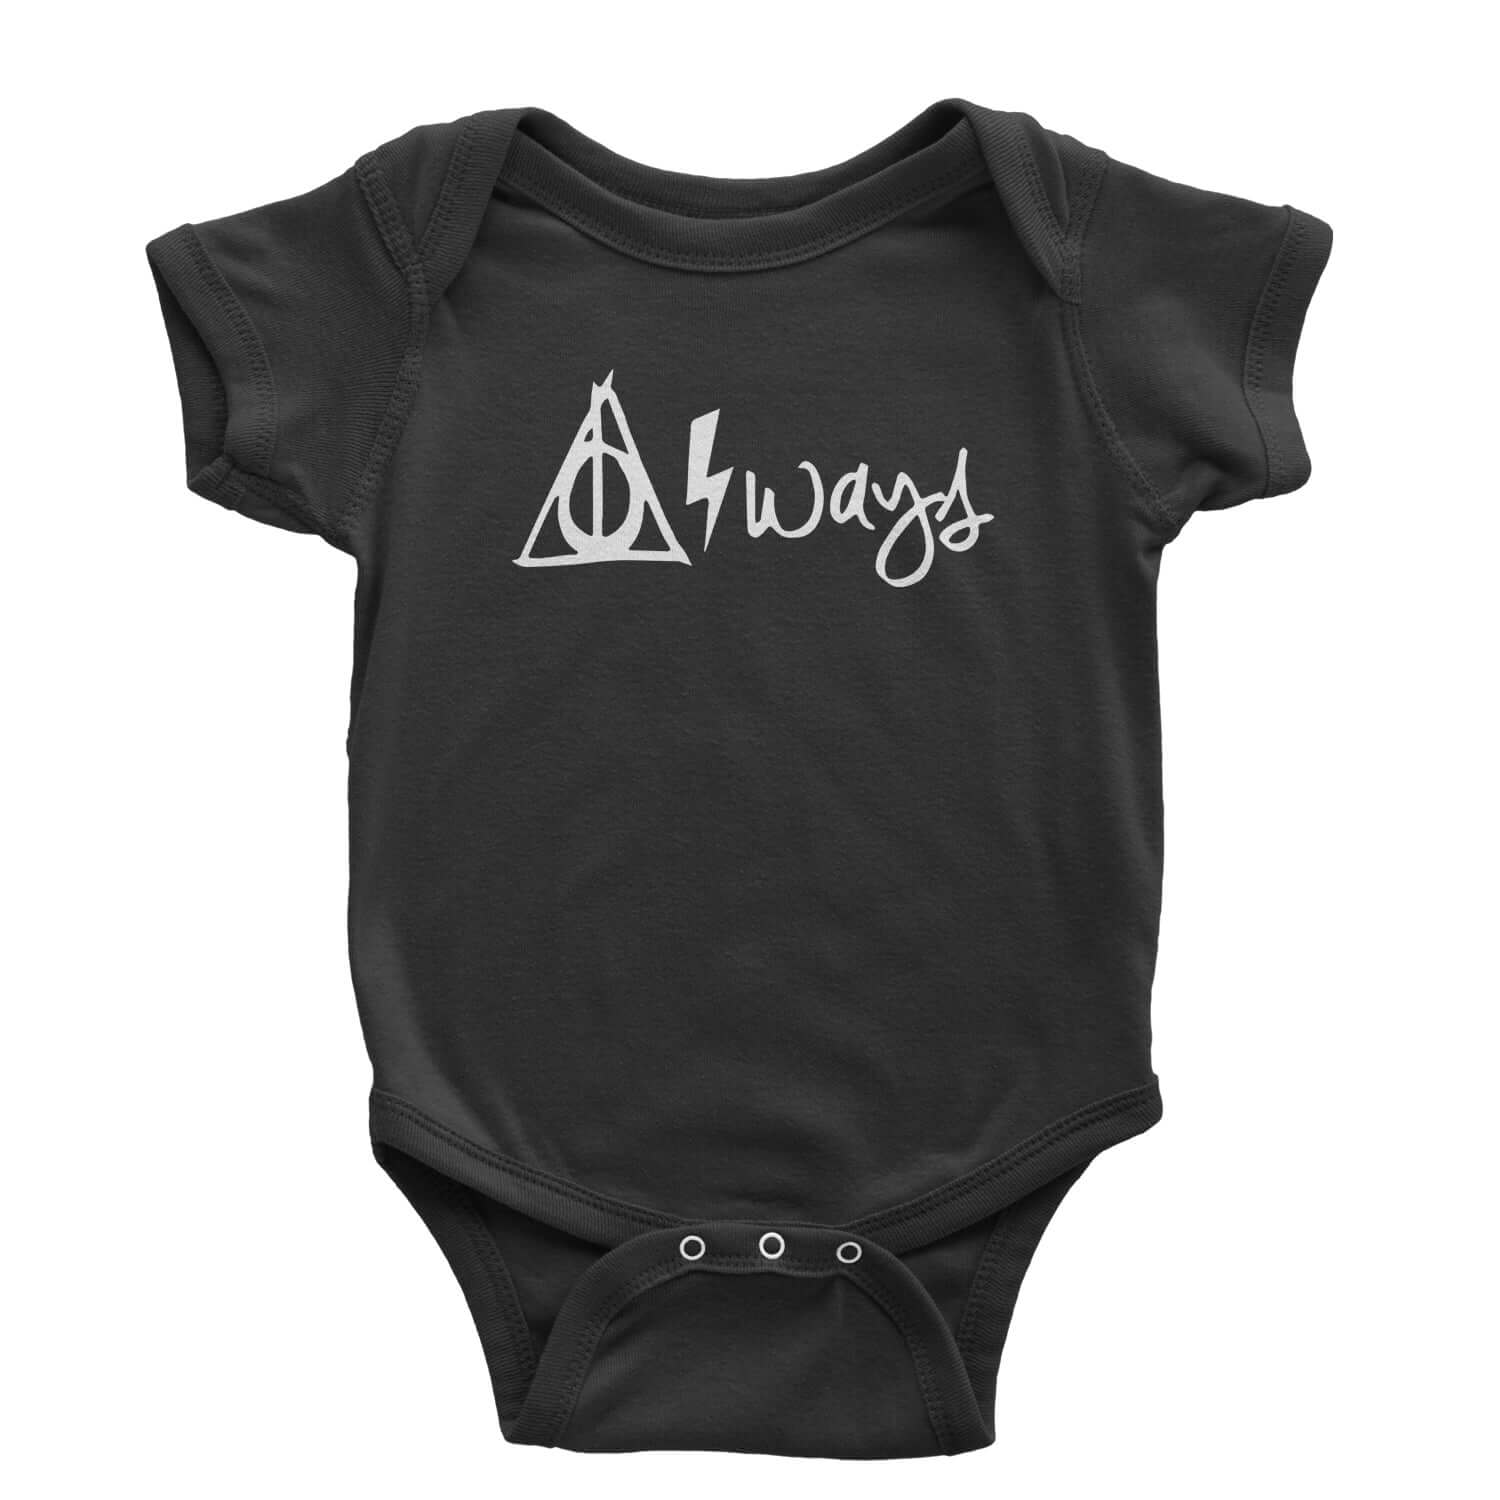 Always Lightning Bolt Infant One-Piece Romper Bodysuit and Toddler T-shirt #expressiontees by Expression Tees